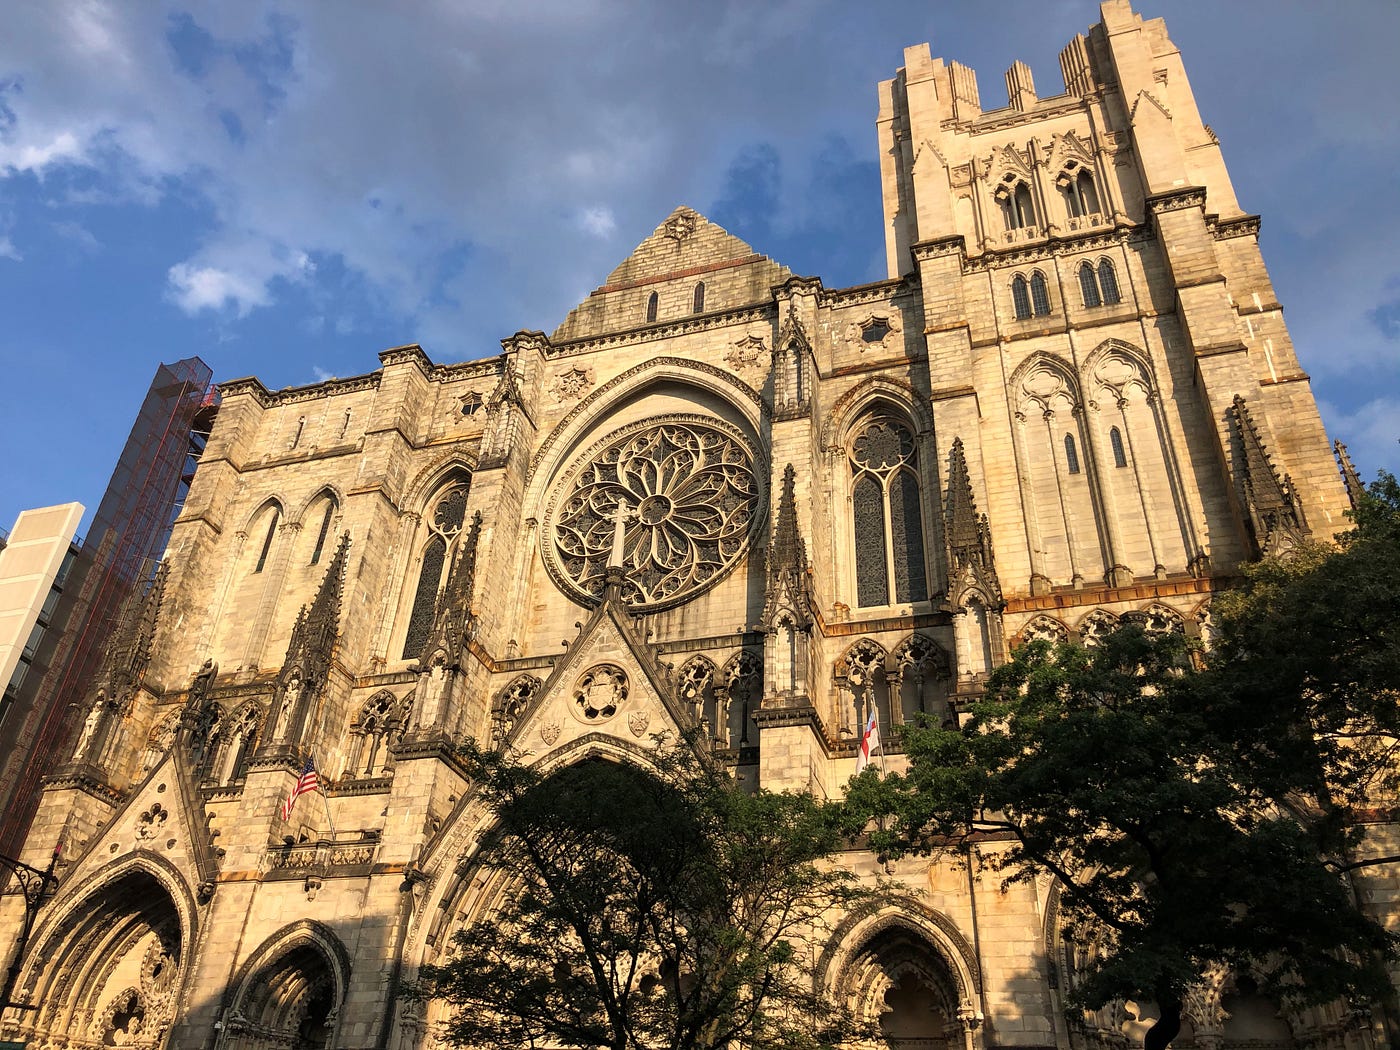 Pride Month Returns to The Cathedral of St. John the Divine 